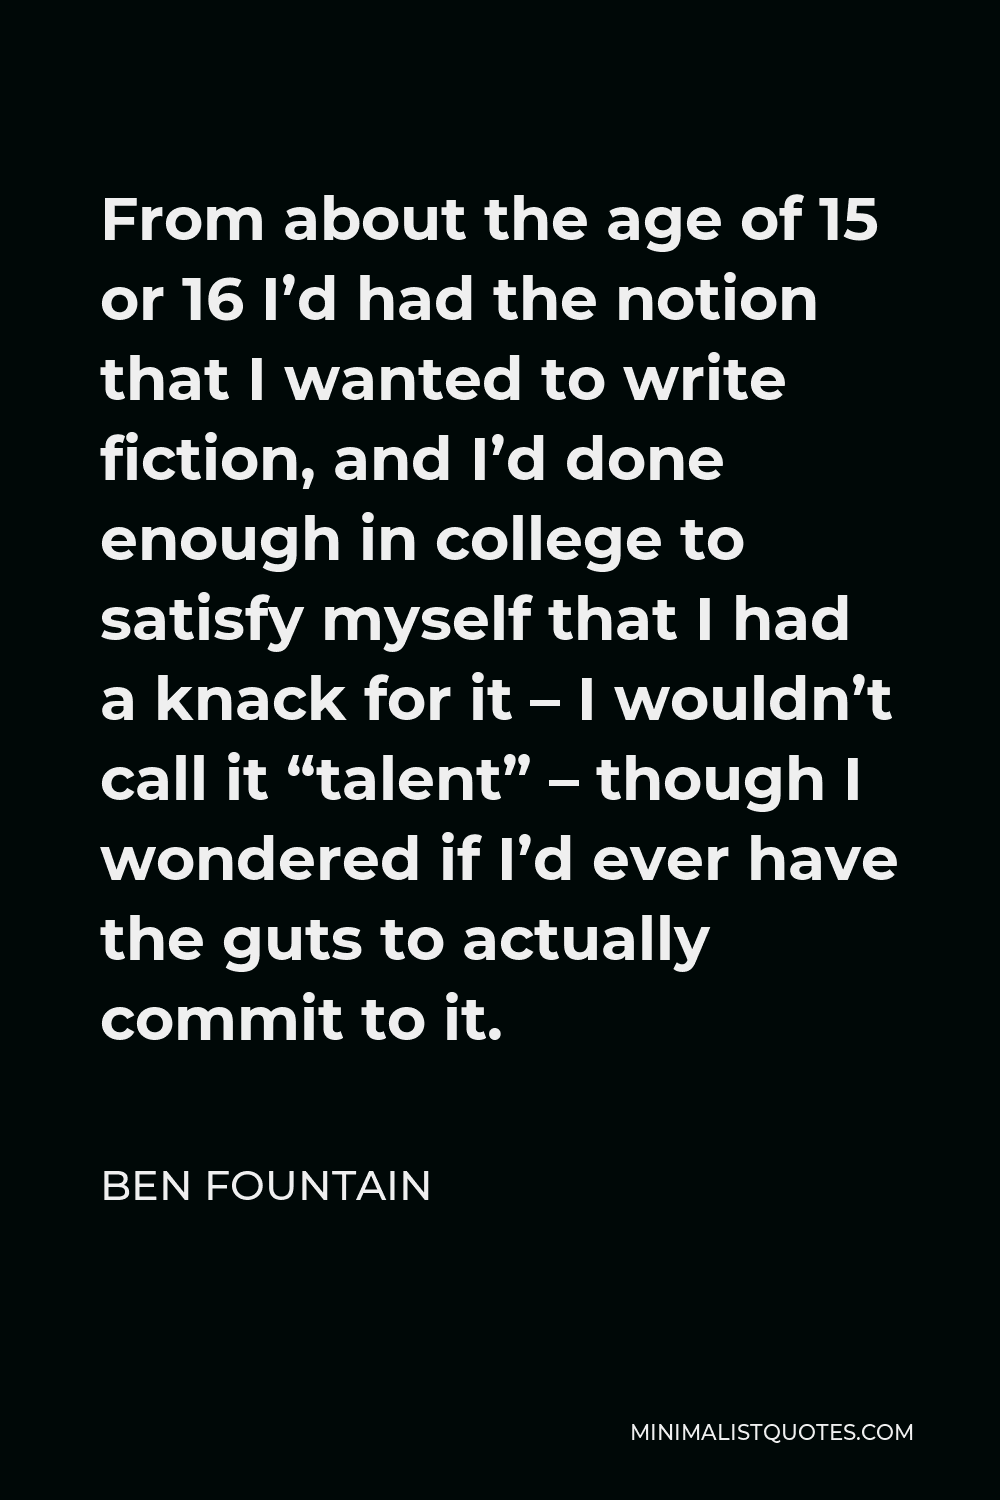 Ben Fountain Quote - From about the age of 15 or 16 I’d had the notion that I wanted to write fiction, and I’d done enough in college to satisfy myself that I had a knack for it – I wouldn’t call it “talent” – though I wondered if I’d ever have the guts to actually commit to it.